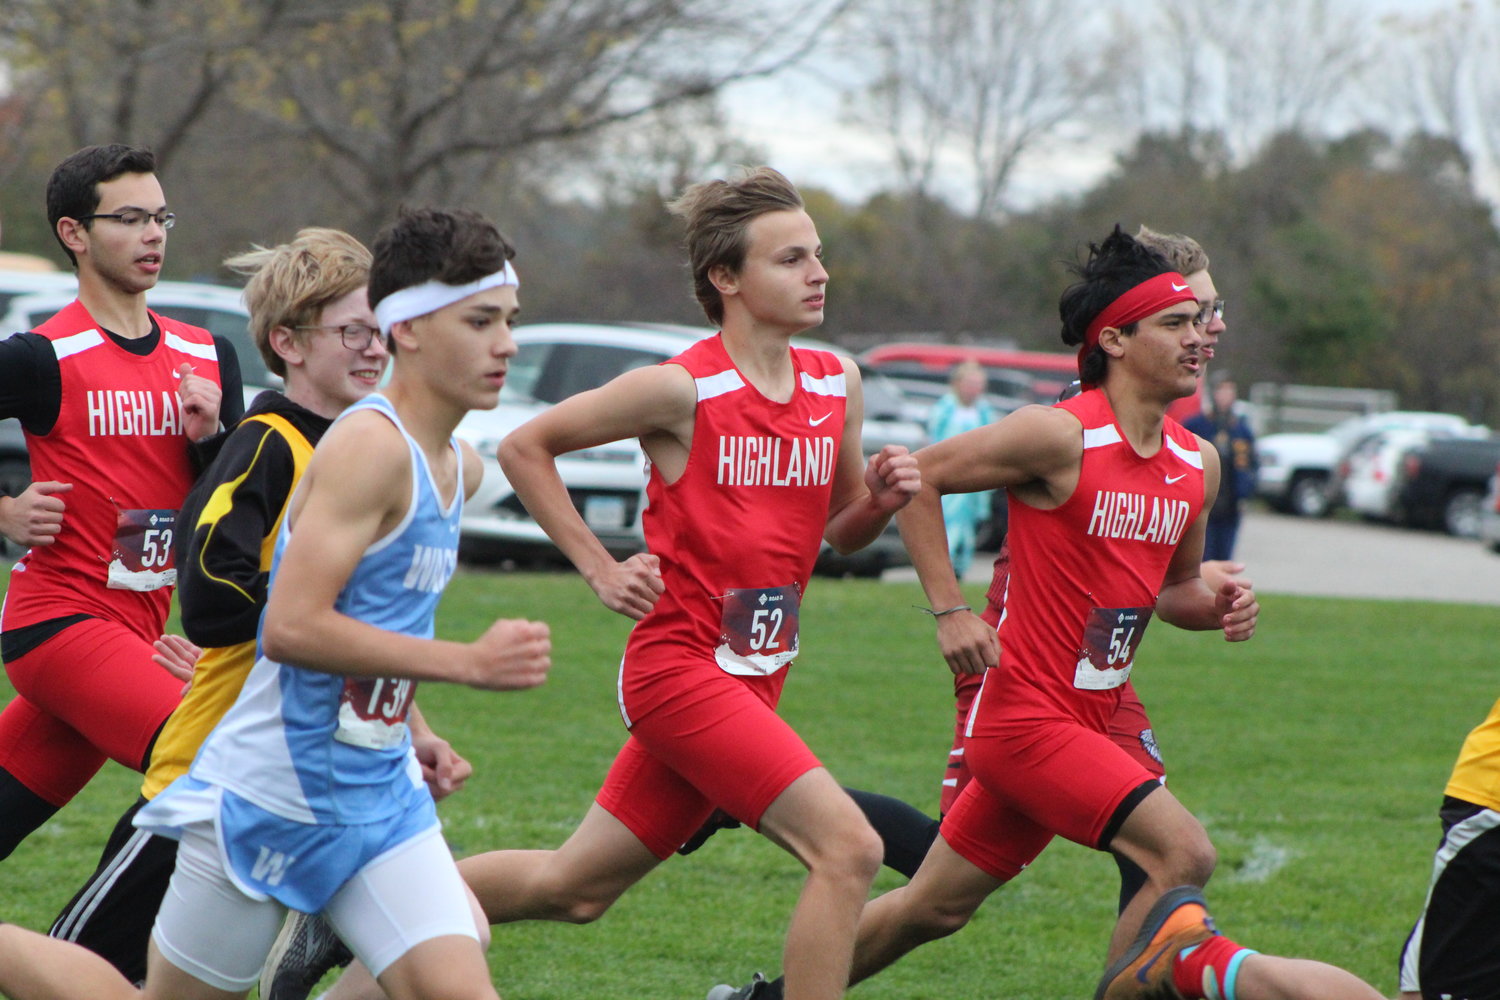 Highland runners take off at the start of the Class 1A cross country boys state qualifier on October 21 in Iowa City.